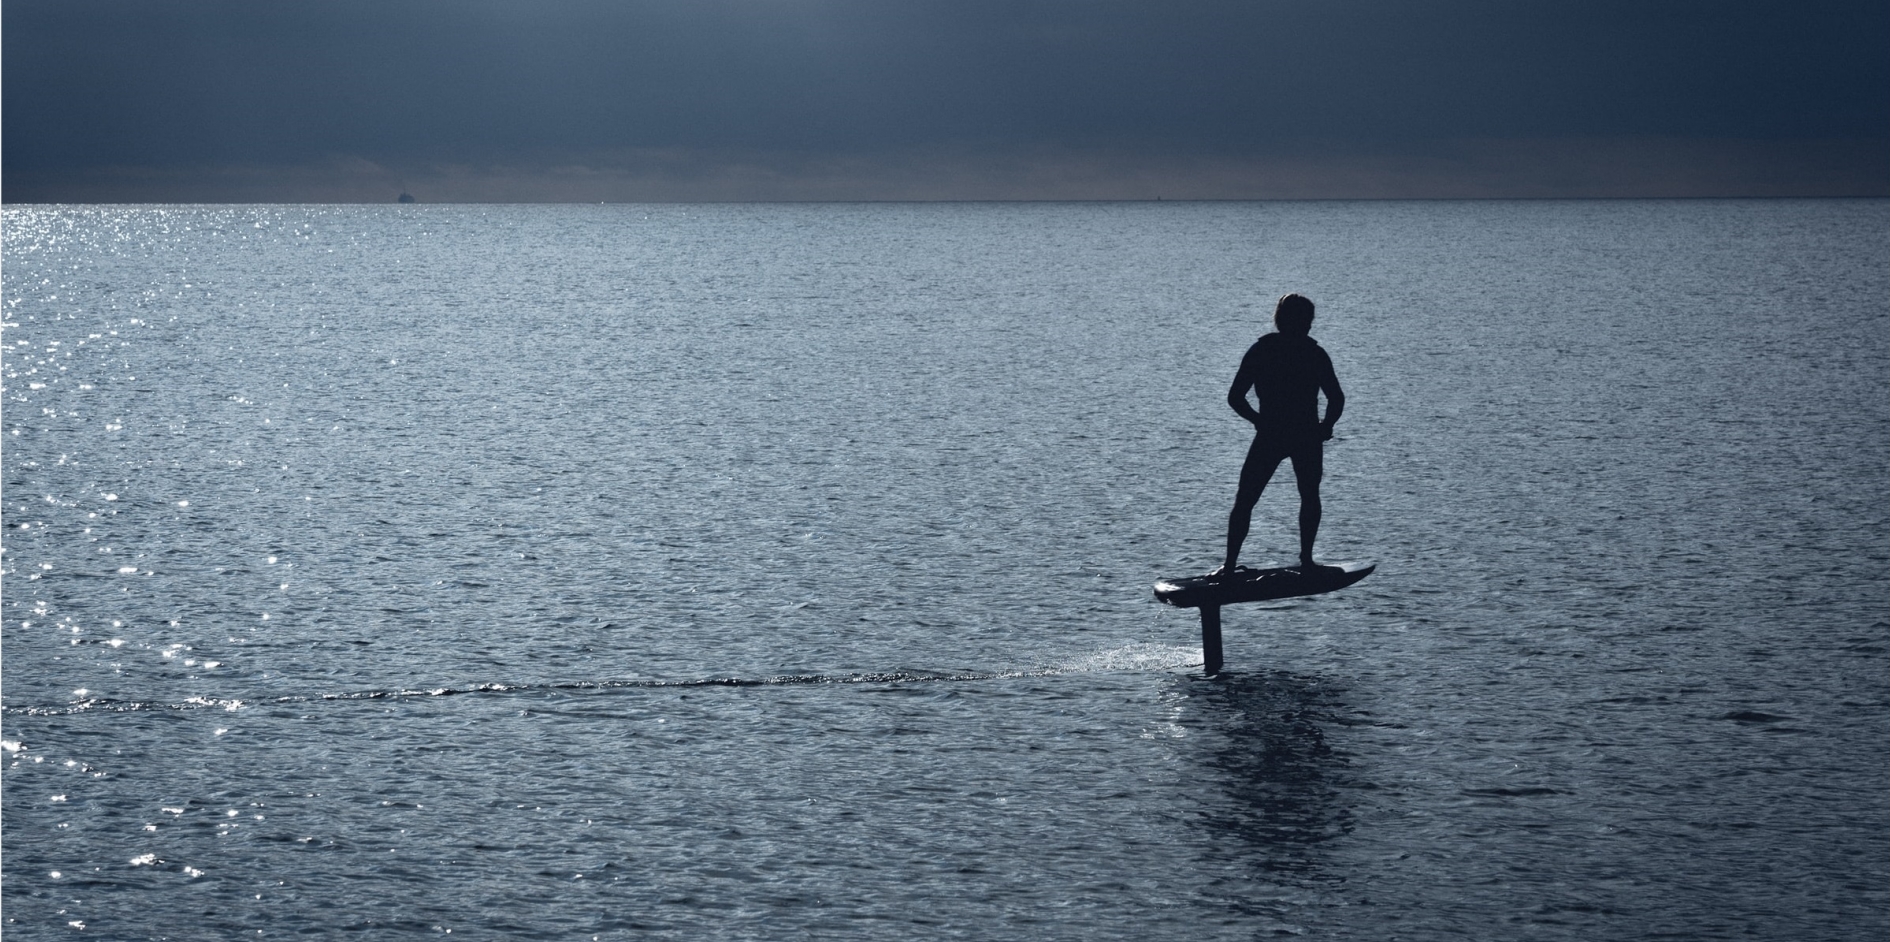 TRAIN YOURSELF AND IMPROVE YOUR SURFING SKILLS WITH AN ELECTRIC SURFBOARD